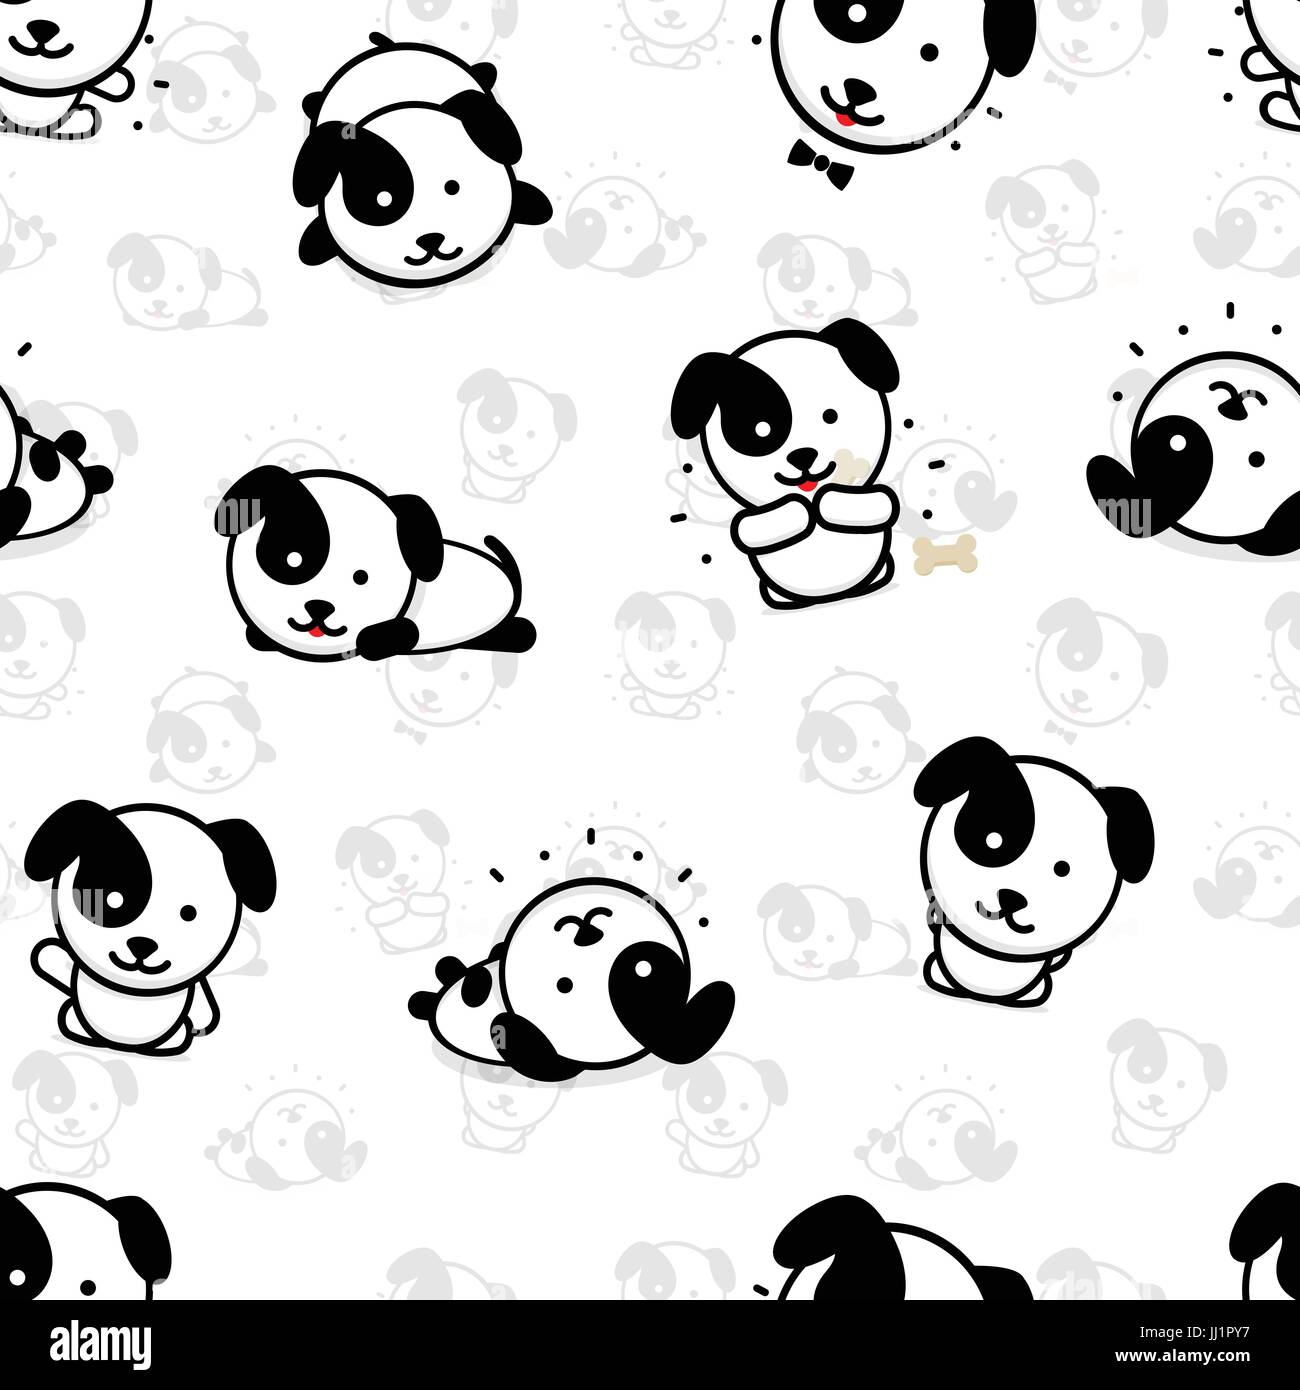 Seamless Pattern with Cute Puppy Dog Vector Illustrations, Collection of Home Animals Simple Texture Elements, Black and White mammals background, Stock Vector